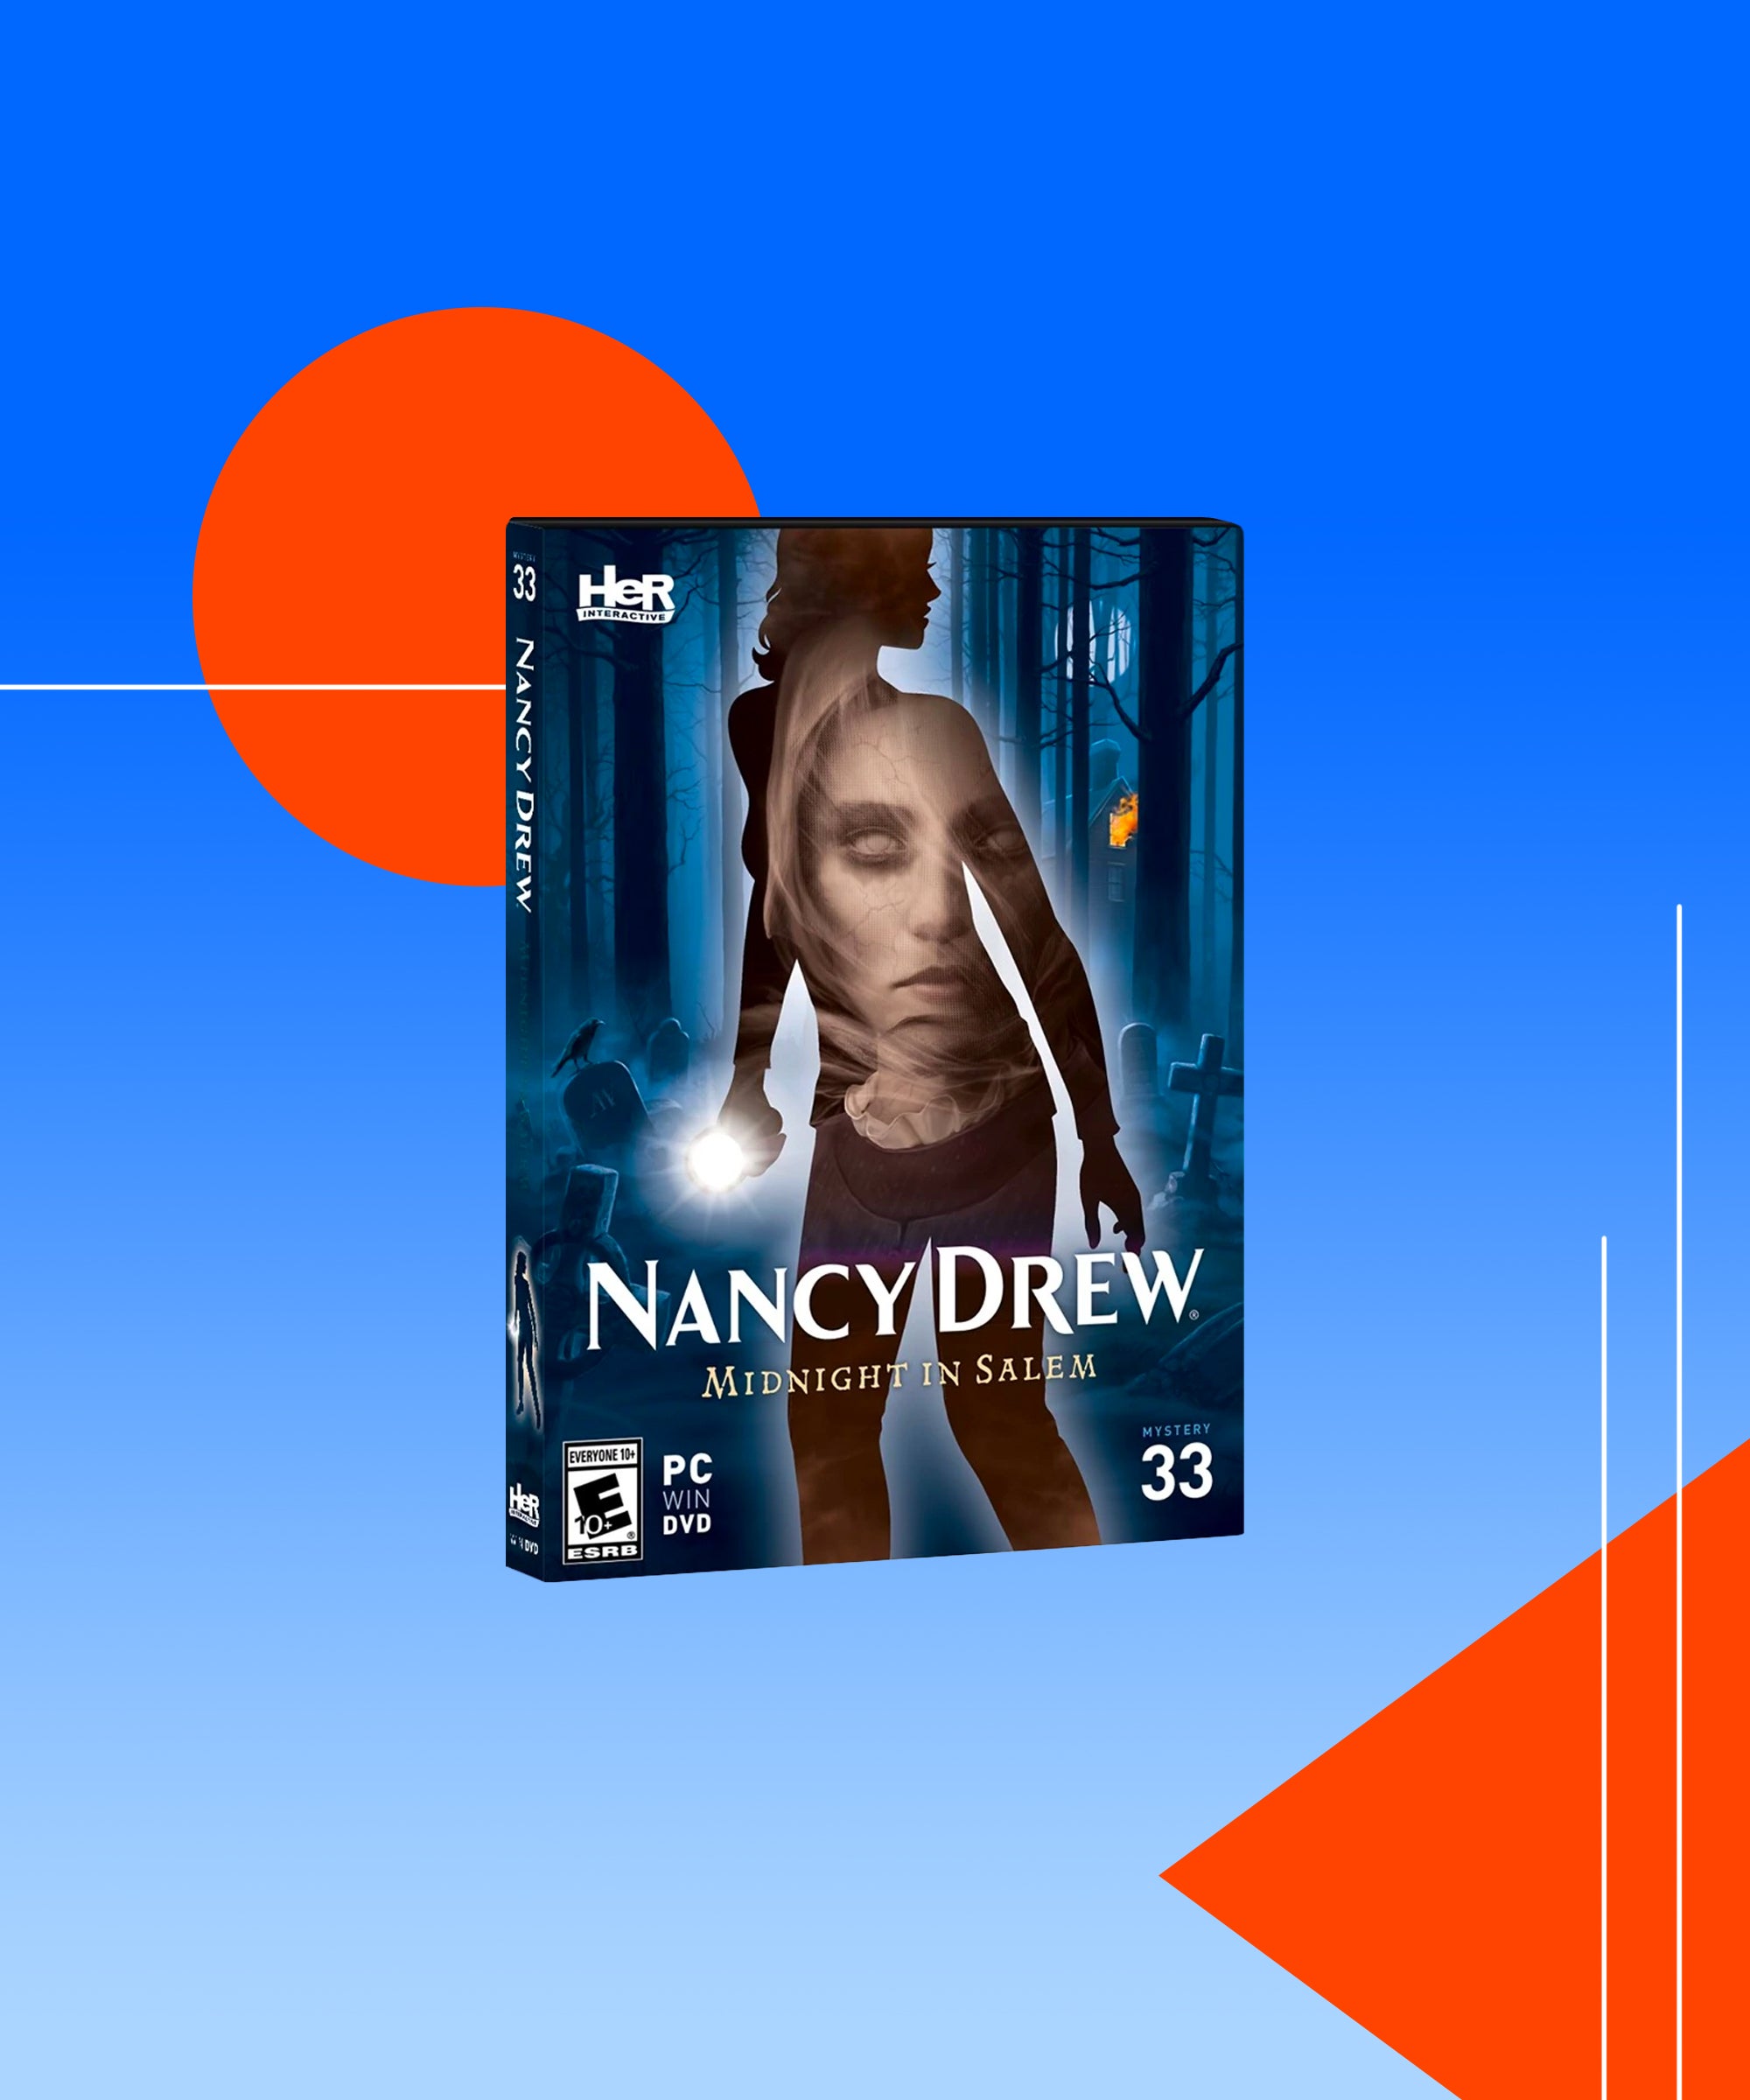 when is the new nancy drew game coming out